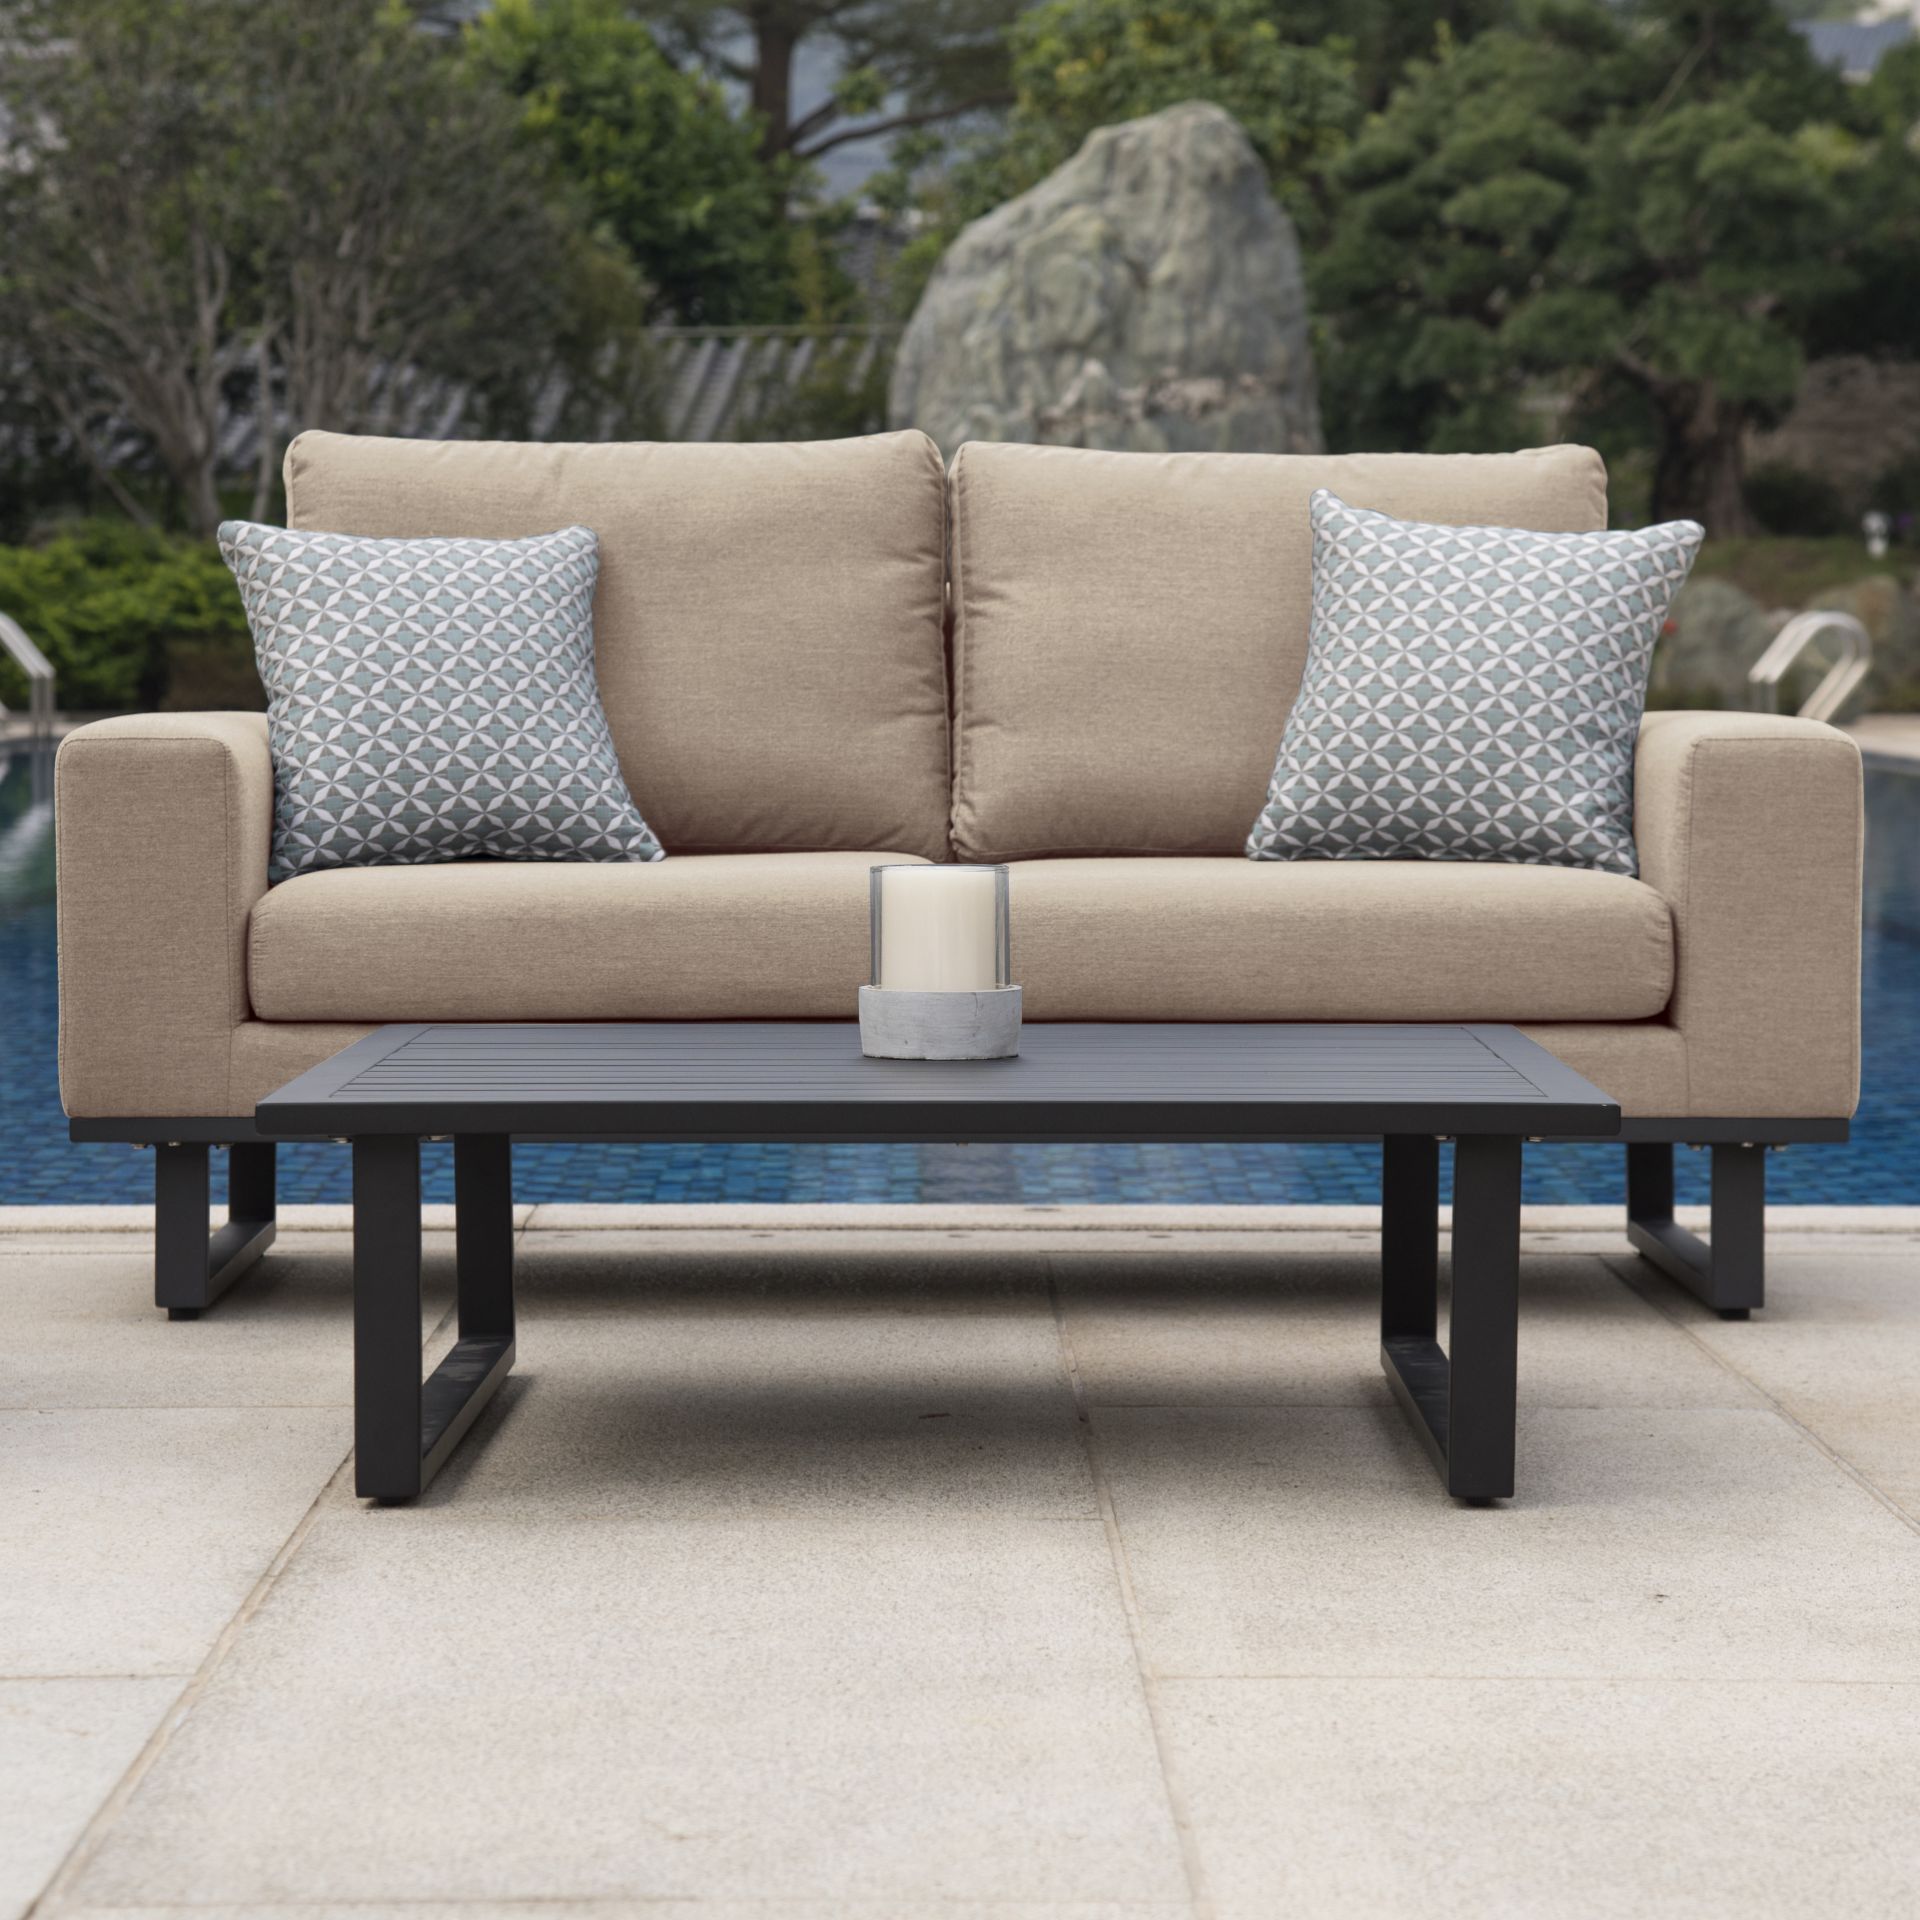 Ethos Outdoor 2 Seat Sofa Set With Coffee Table (Taupe) *BRAND NEW* - Image 6 of 8